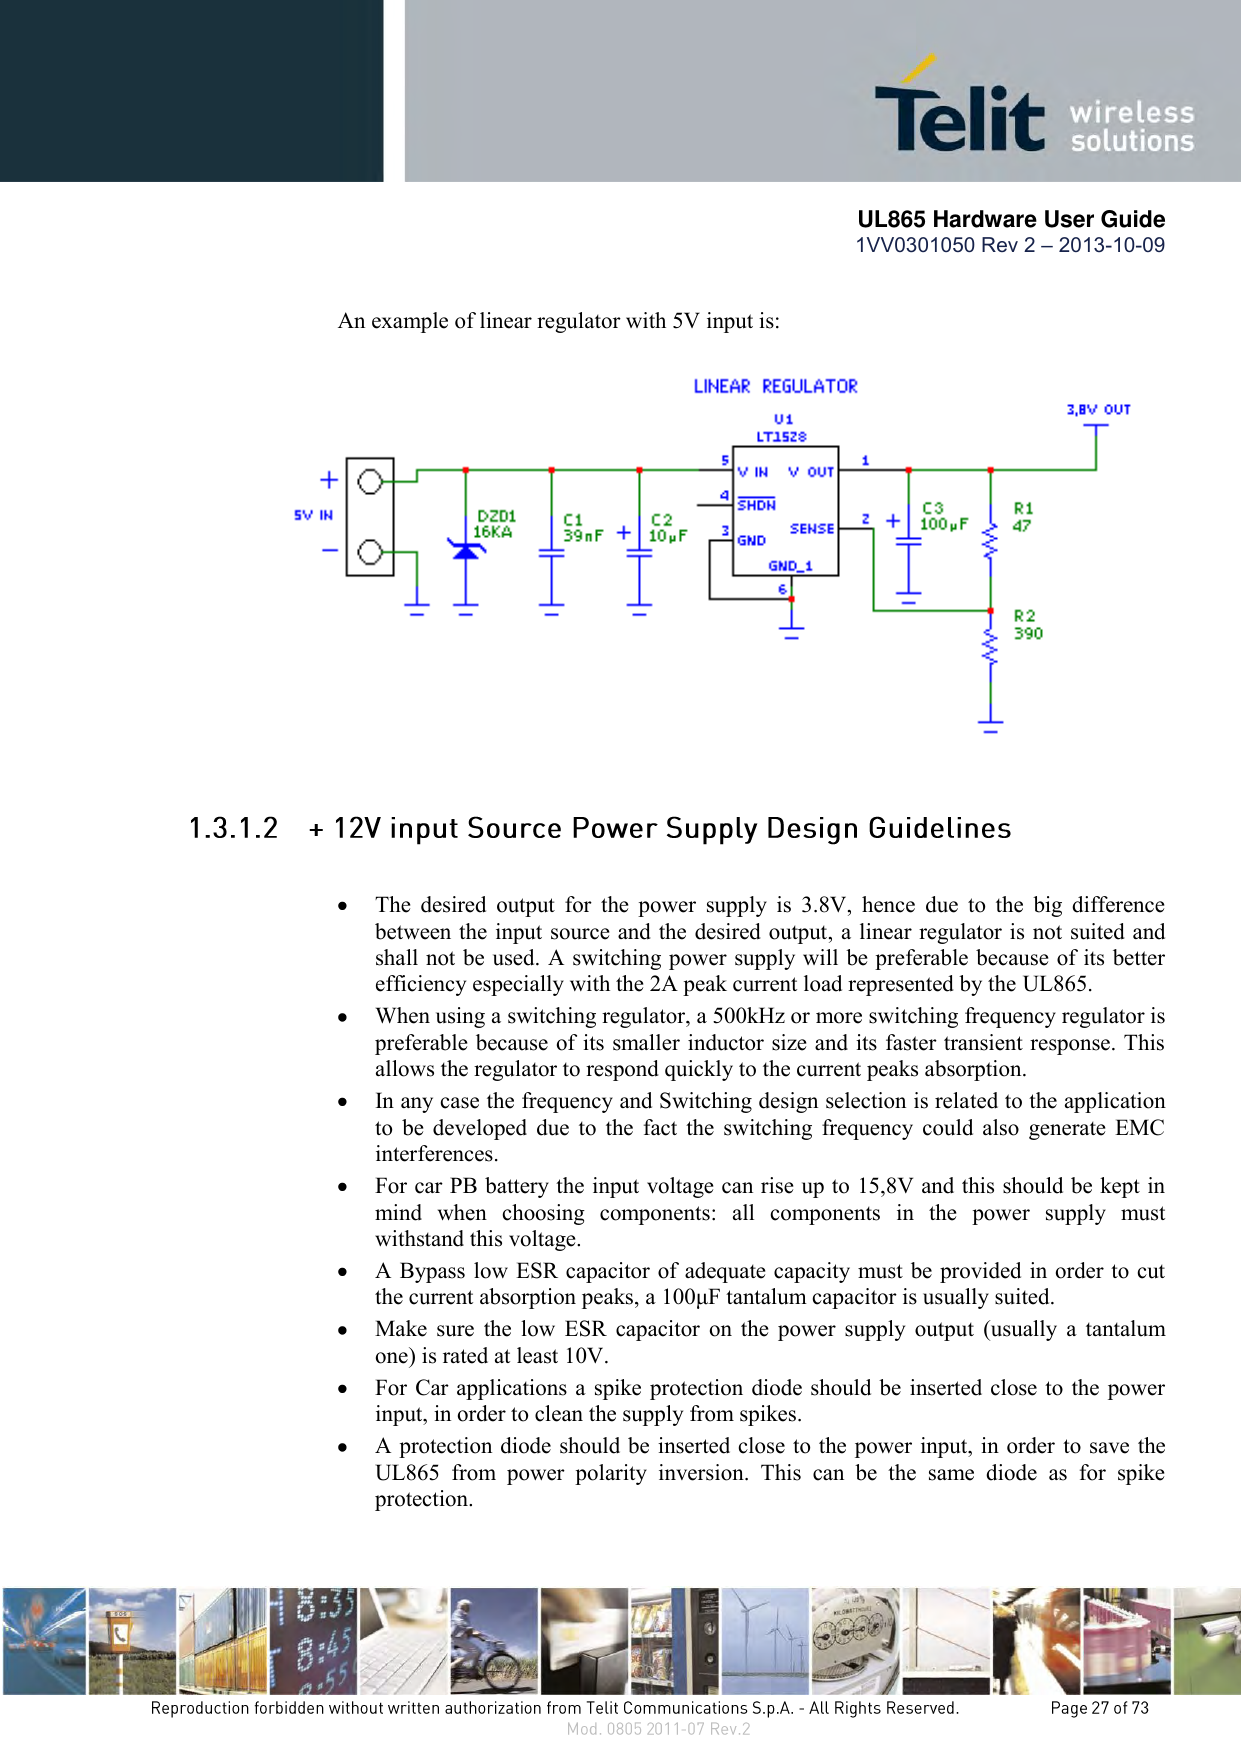       UL865 Hardware User Guide 1VV0301050 Rev 2 – 2013-10-09   An example of linear regulator with 5V input is:   The  desired  output  for  the  power  supply  is  3.8V,  hence  due  to  the  big  difference between the input source and the desired output, a linear regulator is not suited and shall not be used. A switching power supply will be preferable because of its better efficiency especially with the 2A peak current load represented by the UL865.  When using a switching regulator, a 500kHz or more switching frequency regulator is preferable because of its smaller inductor size and its faster transient response. This allows the regulator to respond quickly to the current peaks absorption.   In any case the frequency and Switching design selection is related to the application to  be  developed  due  to  the  fact  the  switching frequency could also  generate EMC interferences.  For car PB battery the input voltage can rise up to 15,8V and this should be kept in mind  when  choosing  components:  all  components  in  the  power  supply  must withstand this voltage.  A Bypass low ESR capacitor of adequate capacity must be provided in order to cut the current absorption peaks, a 100μF tantalum capacitor is usually suited.  Make  sure  the  low  ESR  capacitor  on  the  power  supply  output  (usually  a  tantalum one) is rated at least 10V.  For Car applications a spike protection diode should be inserted close to the power input, in order to clean the supply from spikes.   A protection diode should be inserted close to the power input, in order to save the UL865  from  power  polarity  inversion.  This  can  be  the  same  diode  as  for  spike protection. 